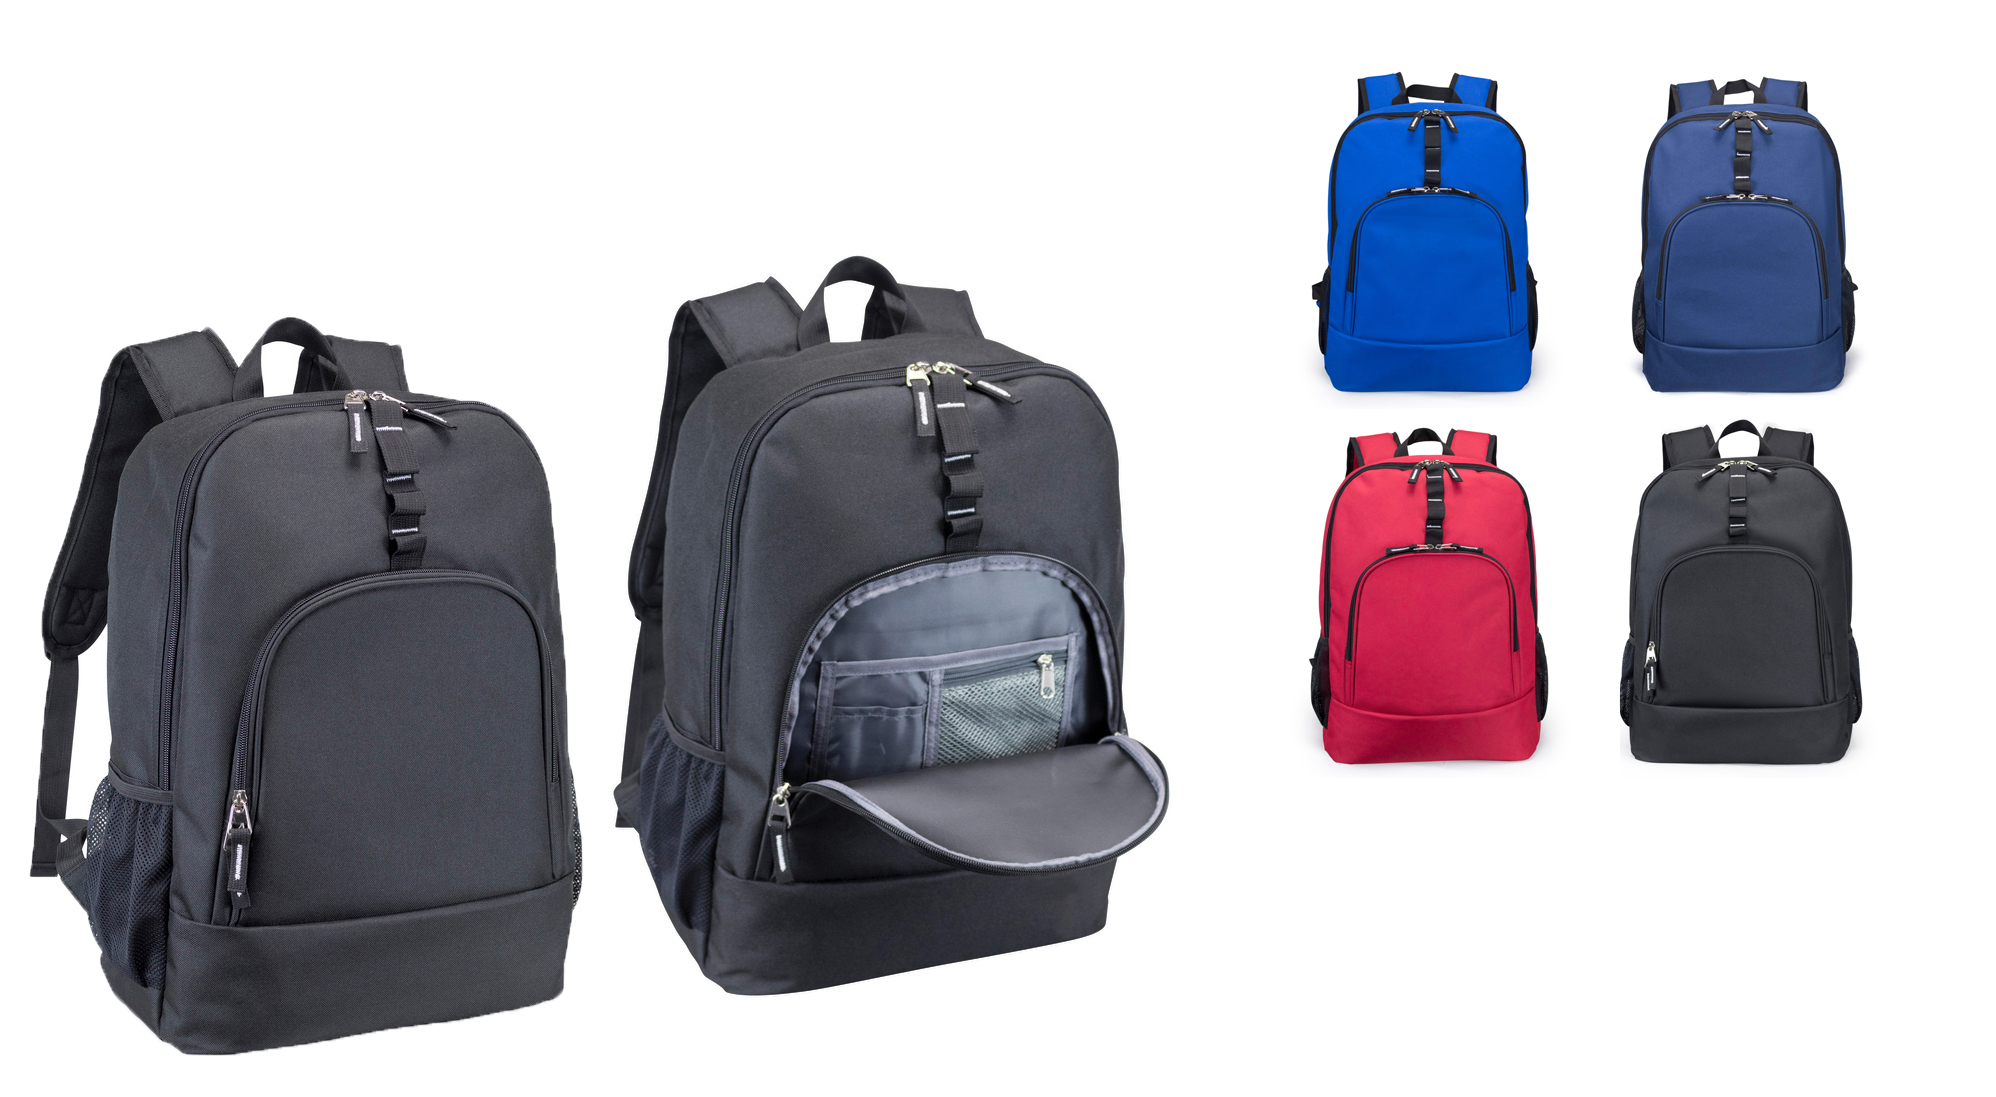 ''18'''' Poly Laptop BACKPACKs w/ Padded Back Panel - Choose Your Color(s)''